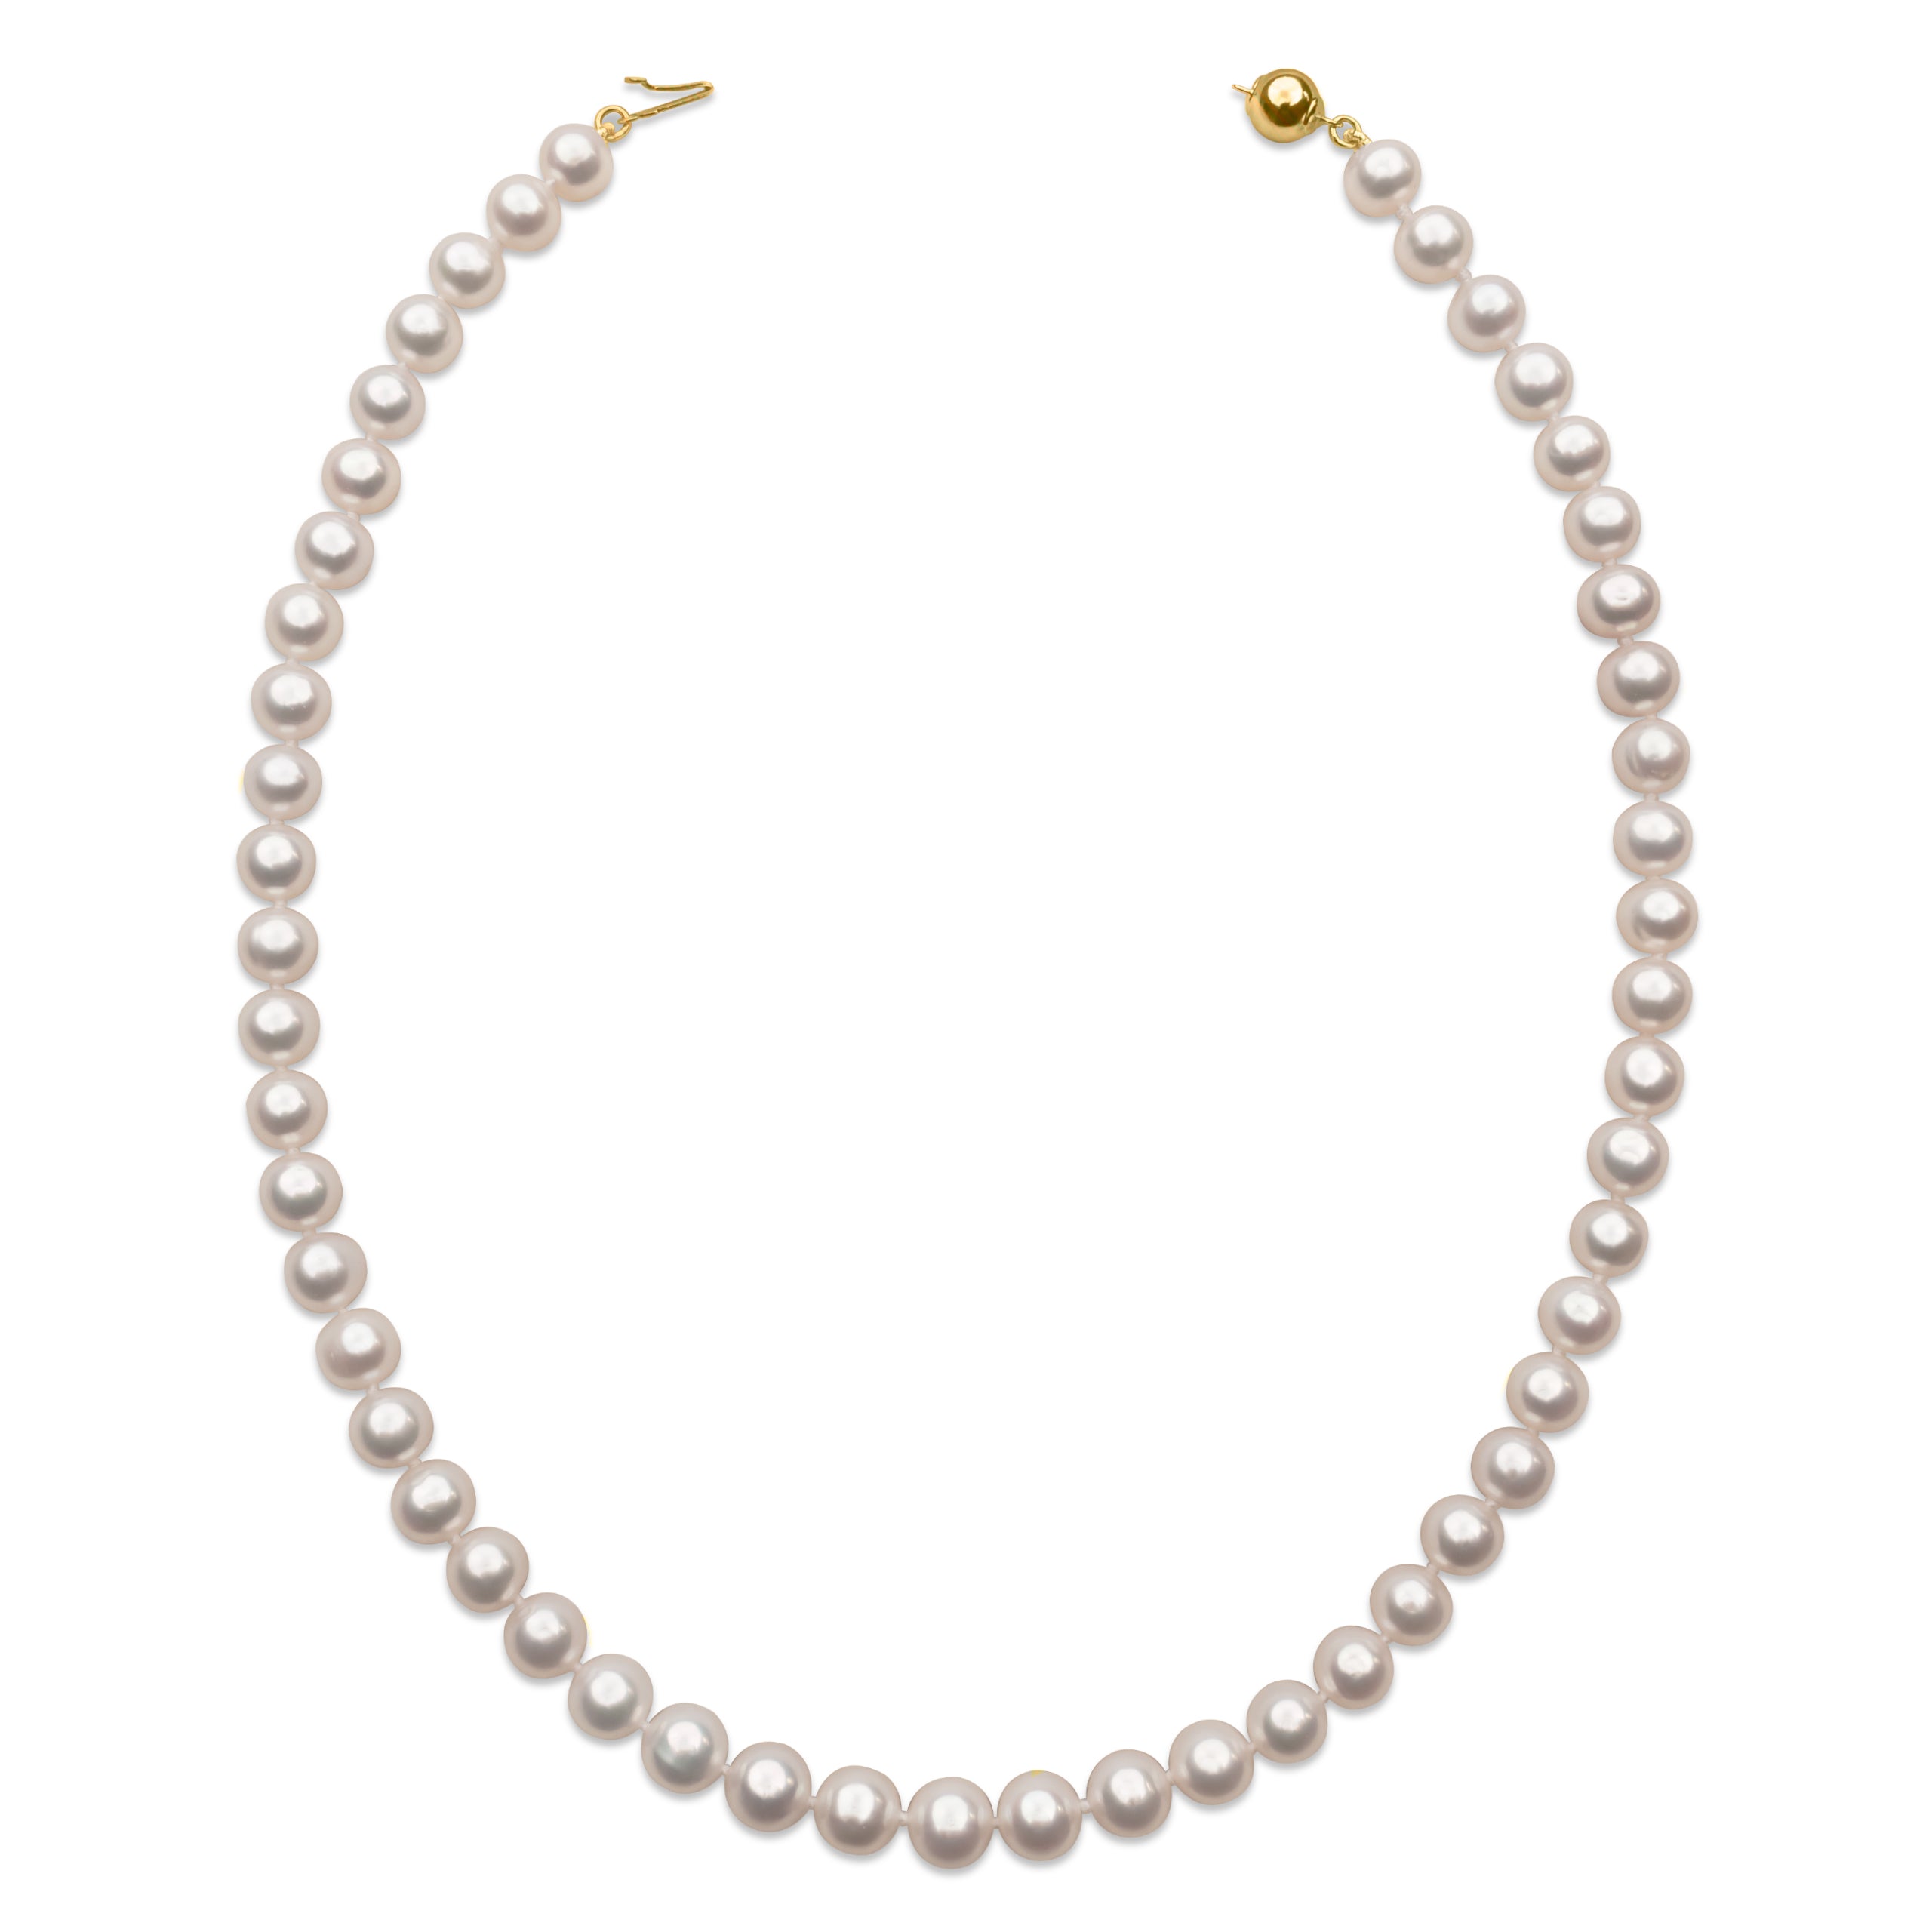 7.5-8.5mm AA+ Freshwater Cultured Pearl Necklace, 60cm long | 18K Gold